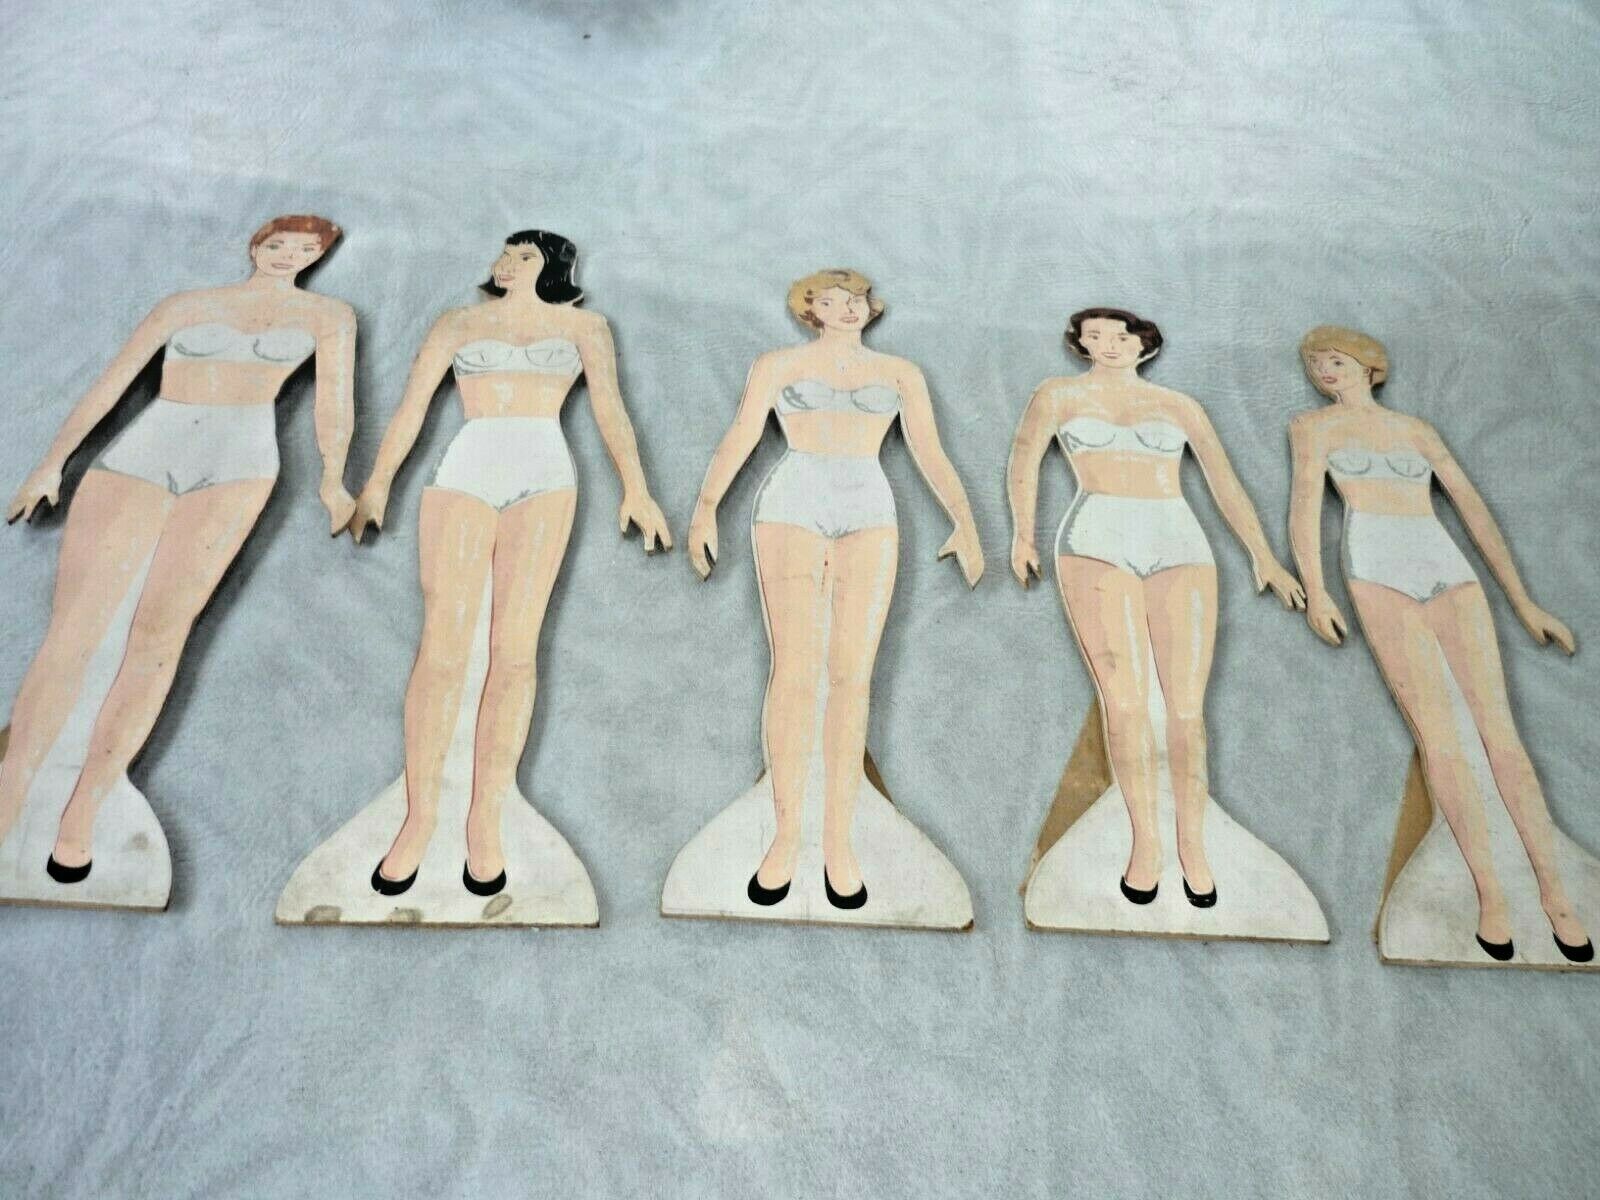 5 Vintage Hand Painted Wooden Cutout Doll Store Display Fashion Ladies